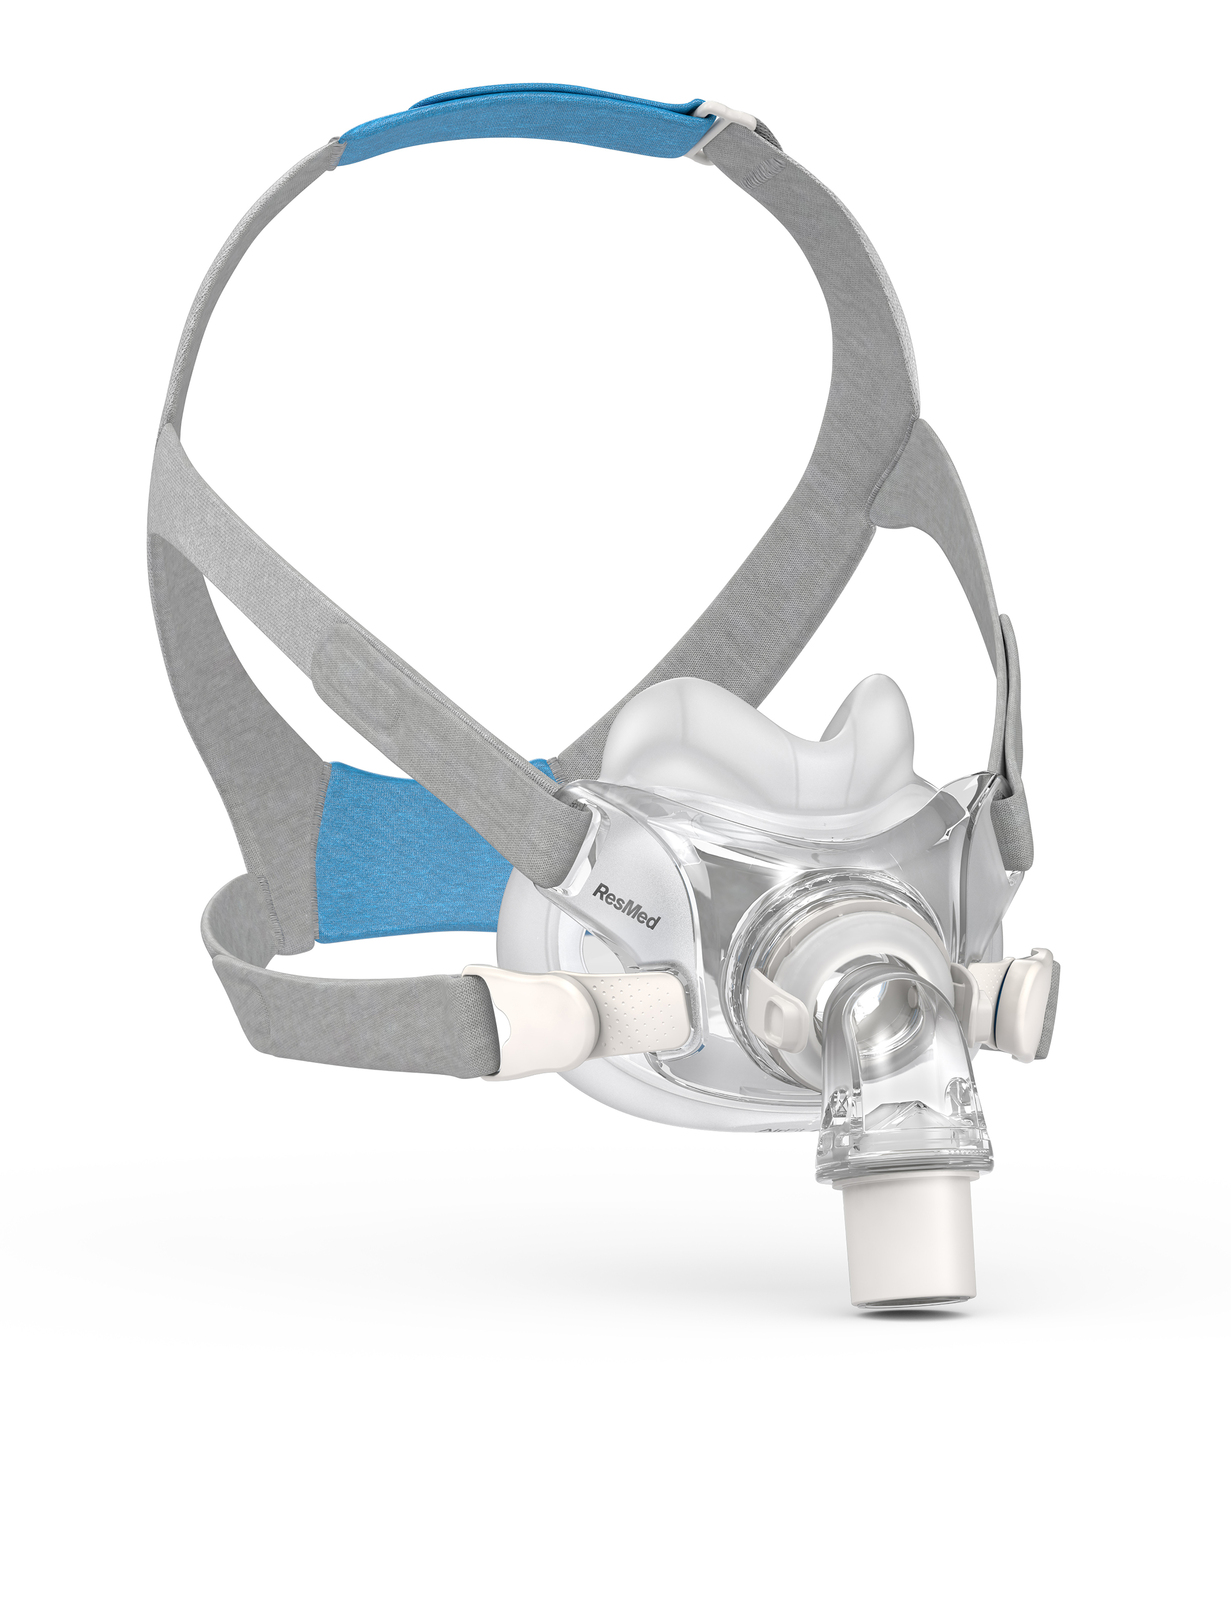 AirFit F30 Resmed small mask it - $120.00